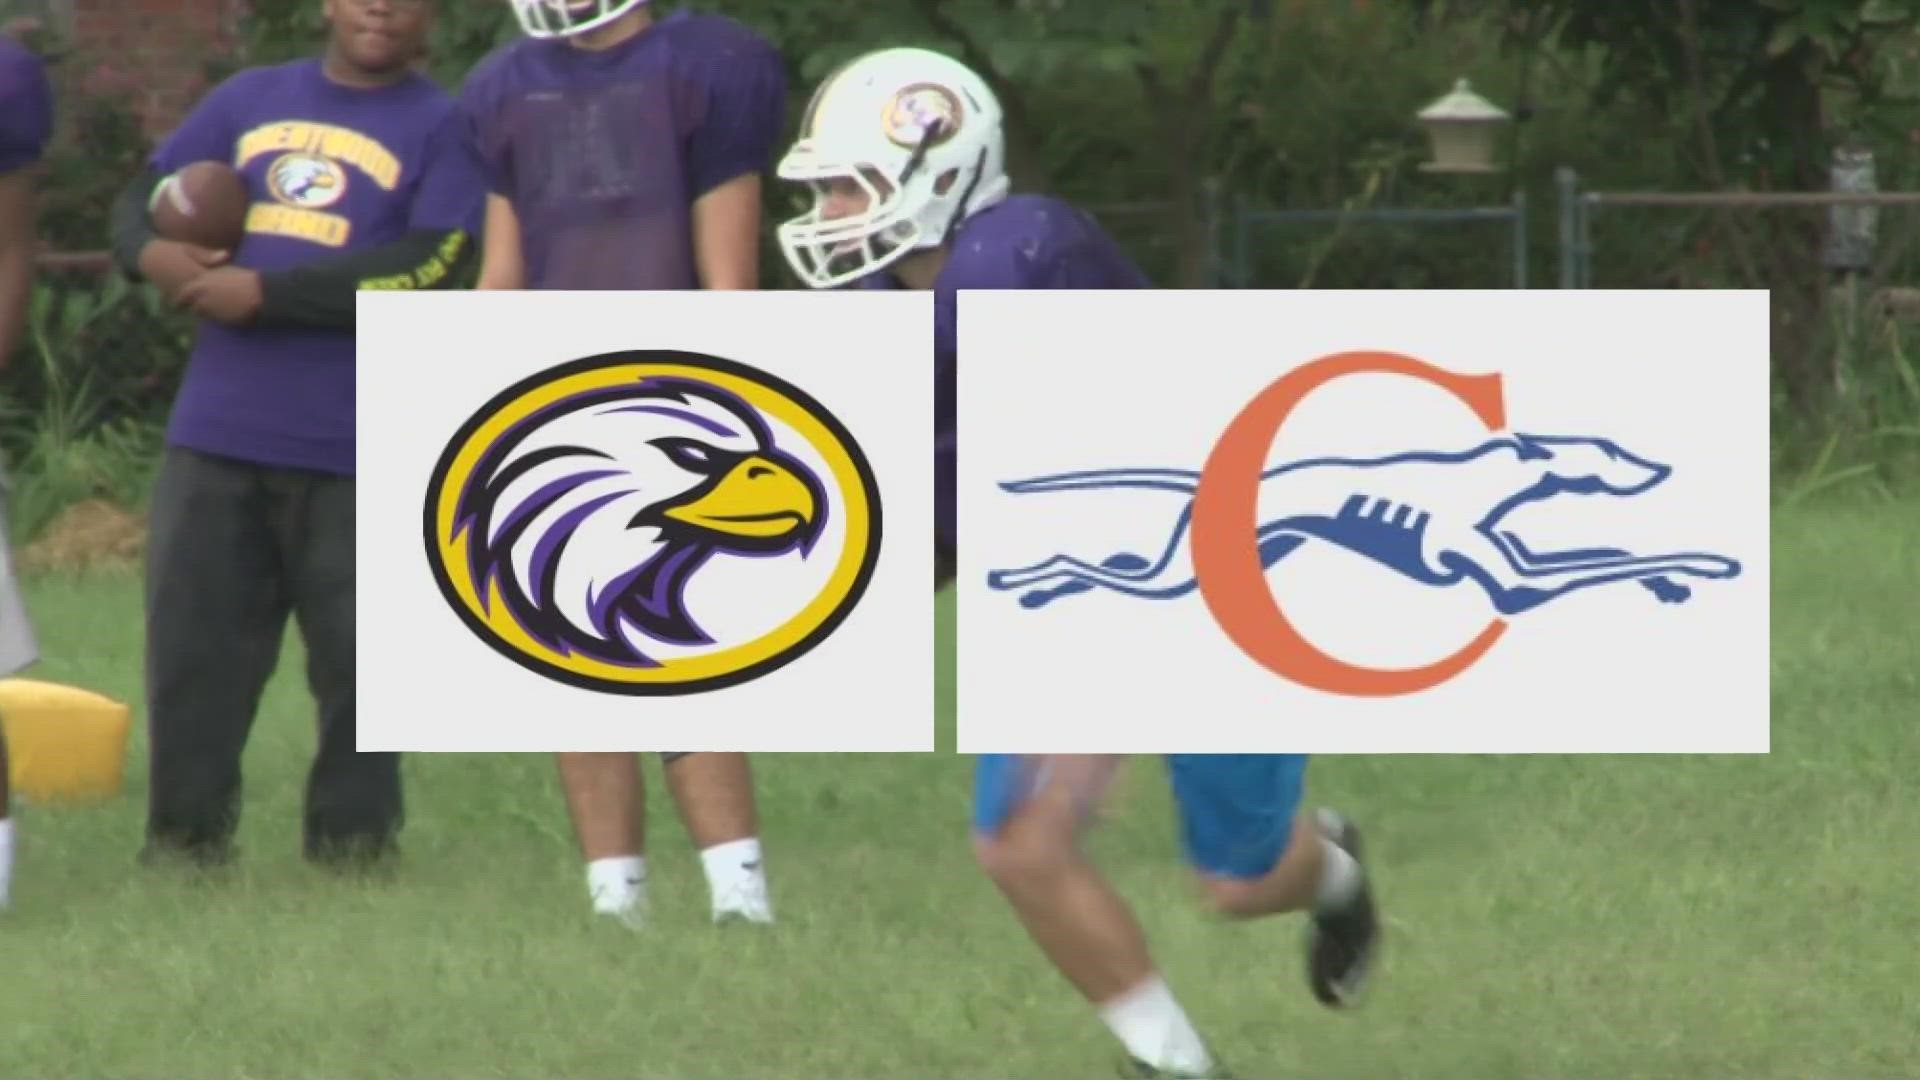 According to the Brentwood School District, the partnership provides a solution to declining football participation. The program will begin practicing in August.